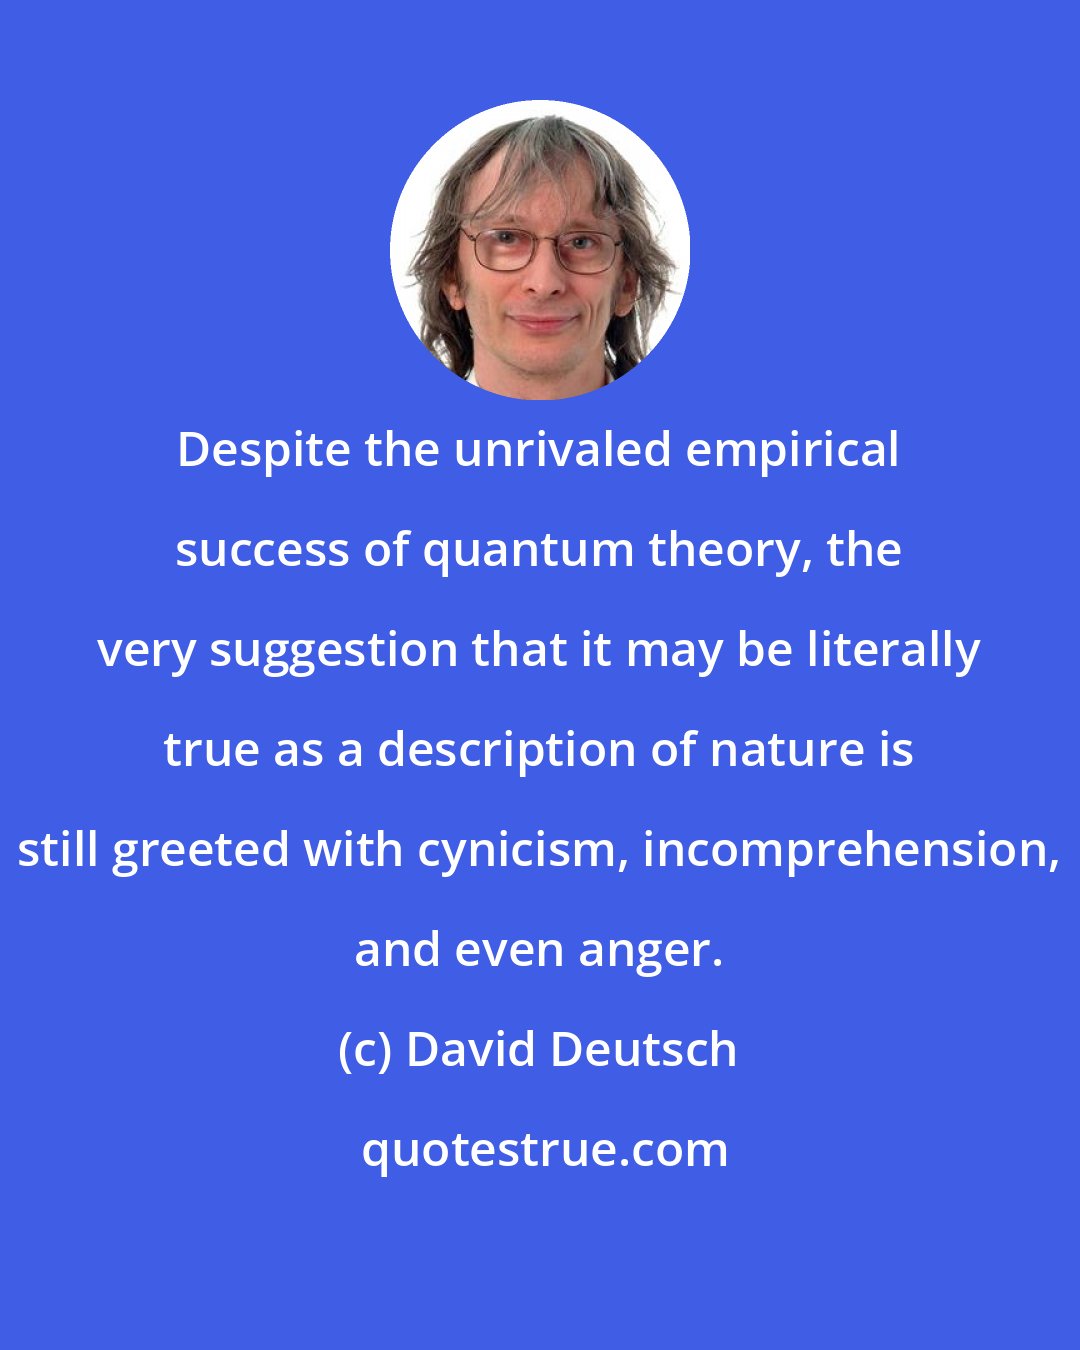 David Deutsch: Despite the unrivaled empirical success of quantum theory, the very suggestion that it may be literally true as a description of nature is still greeted with cynicism, incomprehension, and even anger.